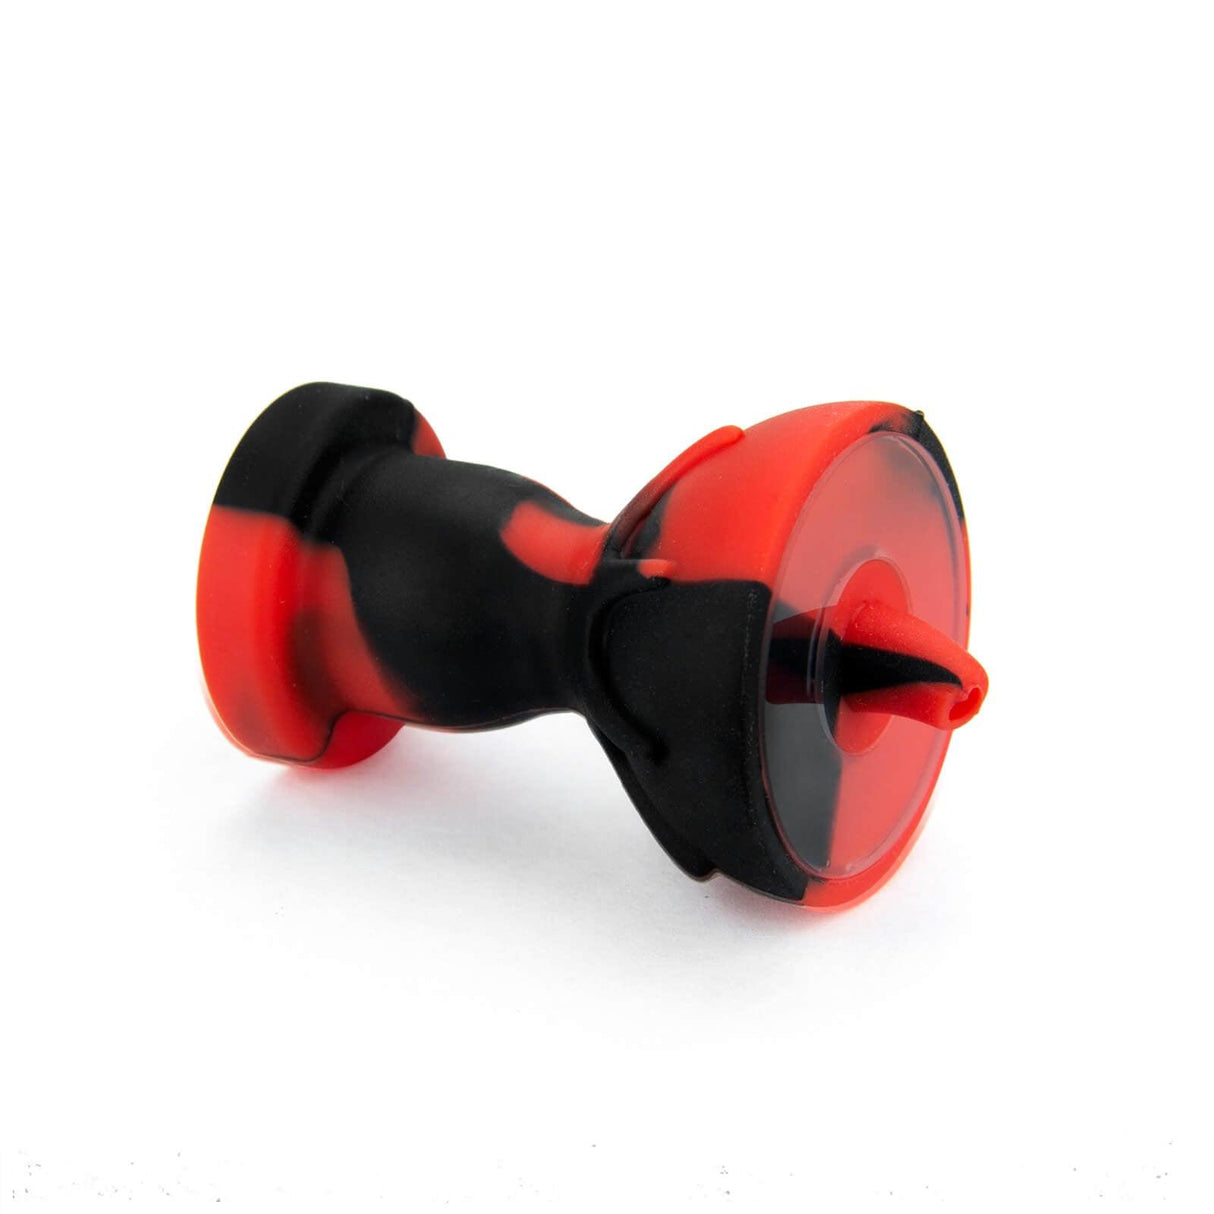 PILOT DIARY Silicone Carb Cap with Glass Bowl Screen in Red and Black - Side View